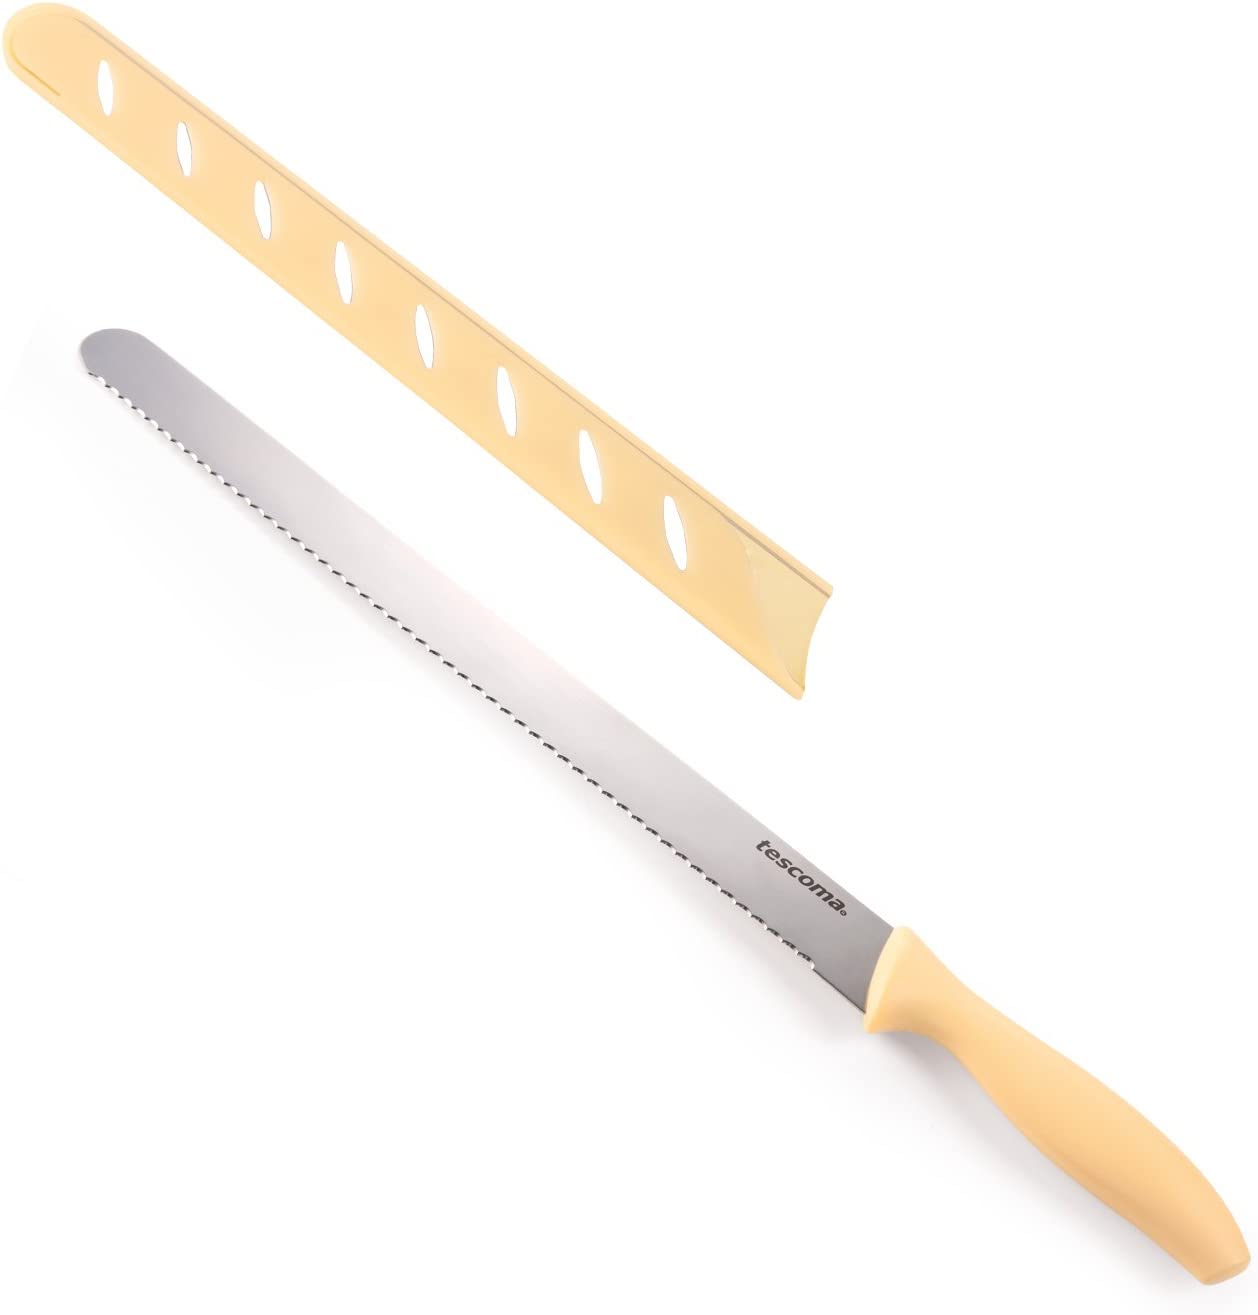 Tescoma Cake knife 30 cm long, pastry knife with one-sided saw edge and blade guard